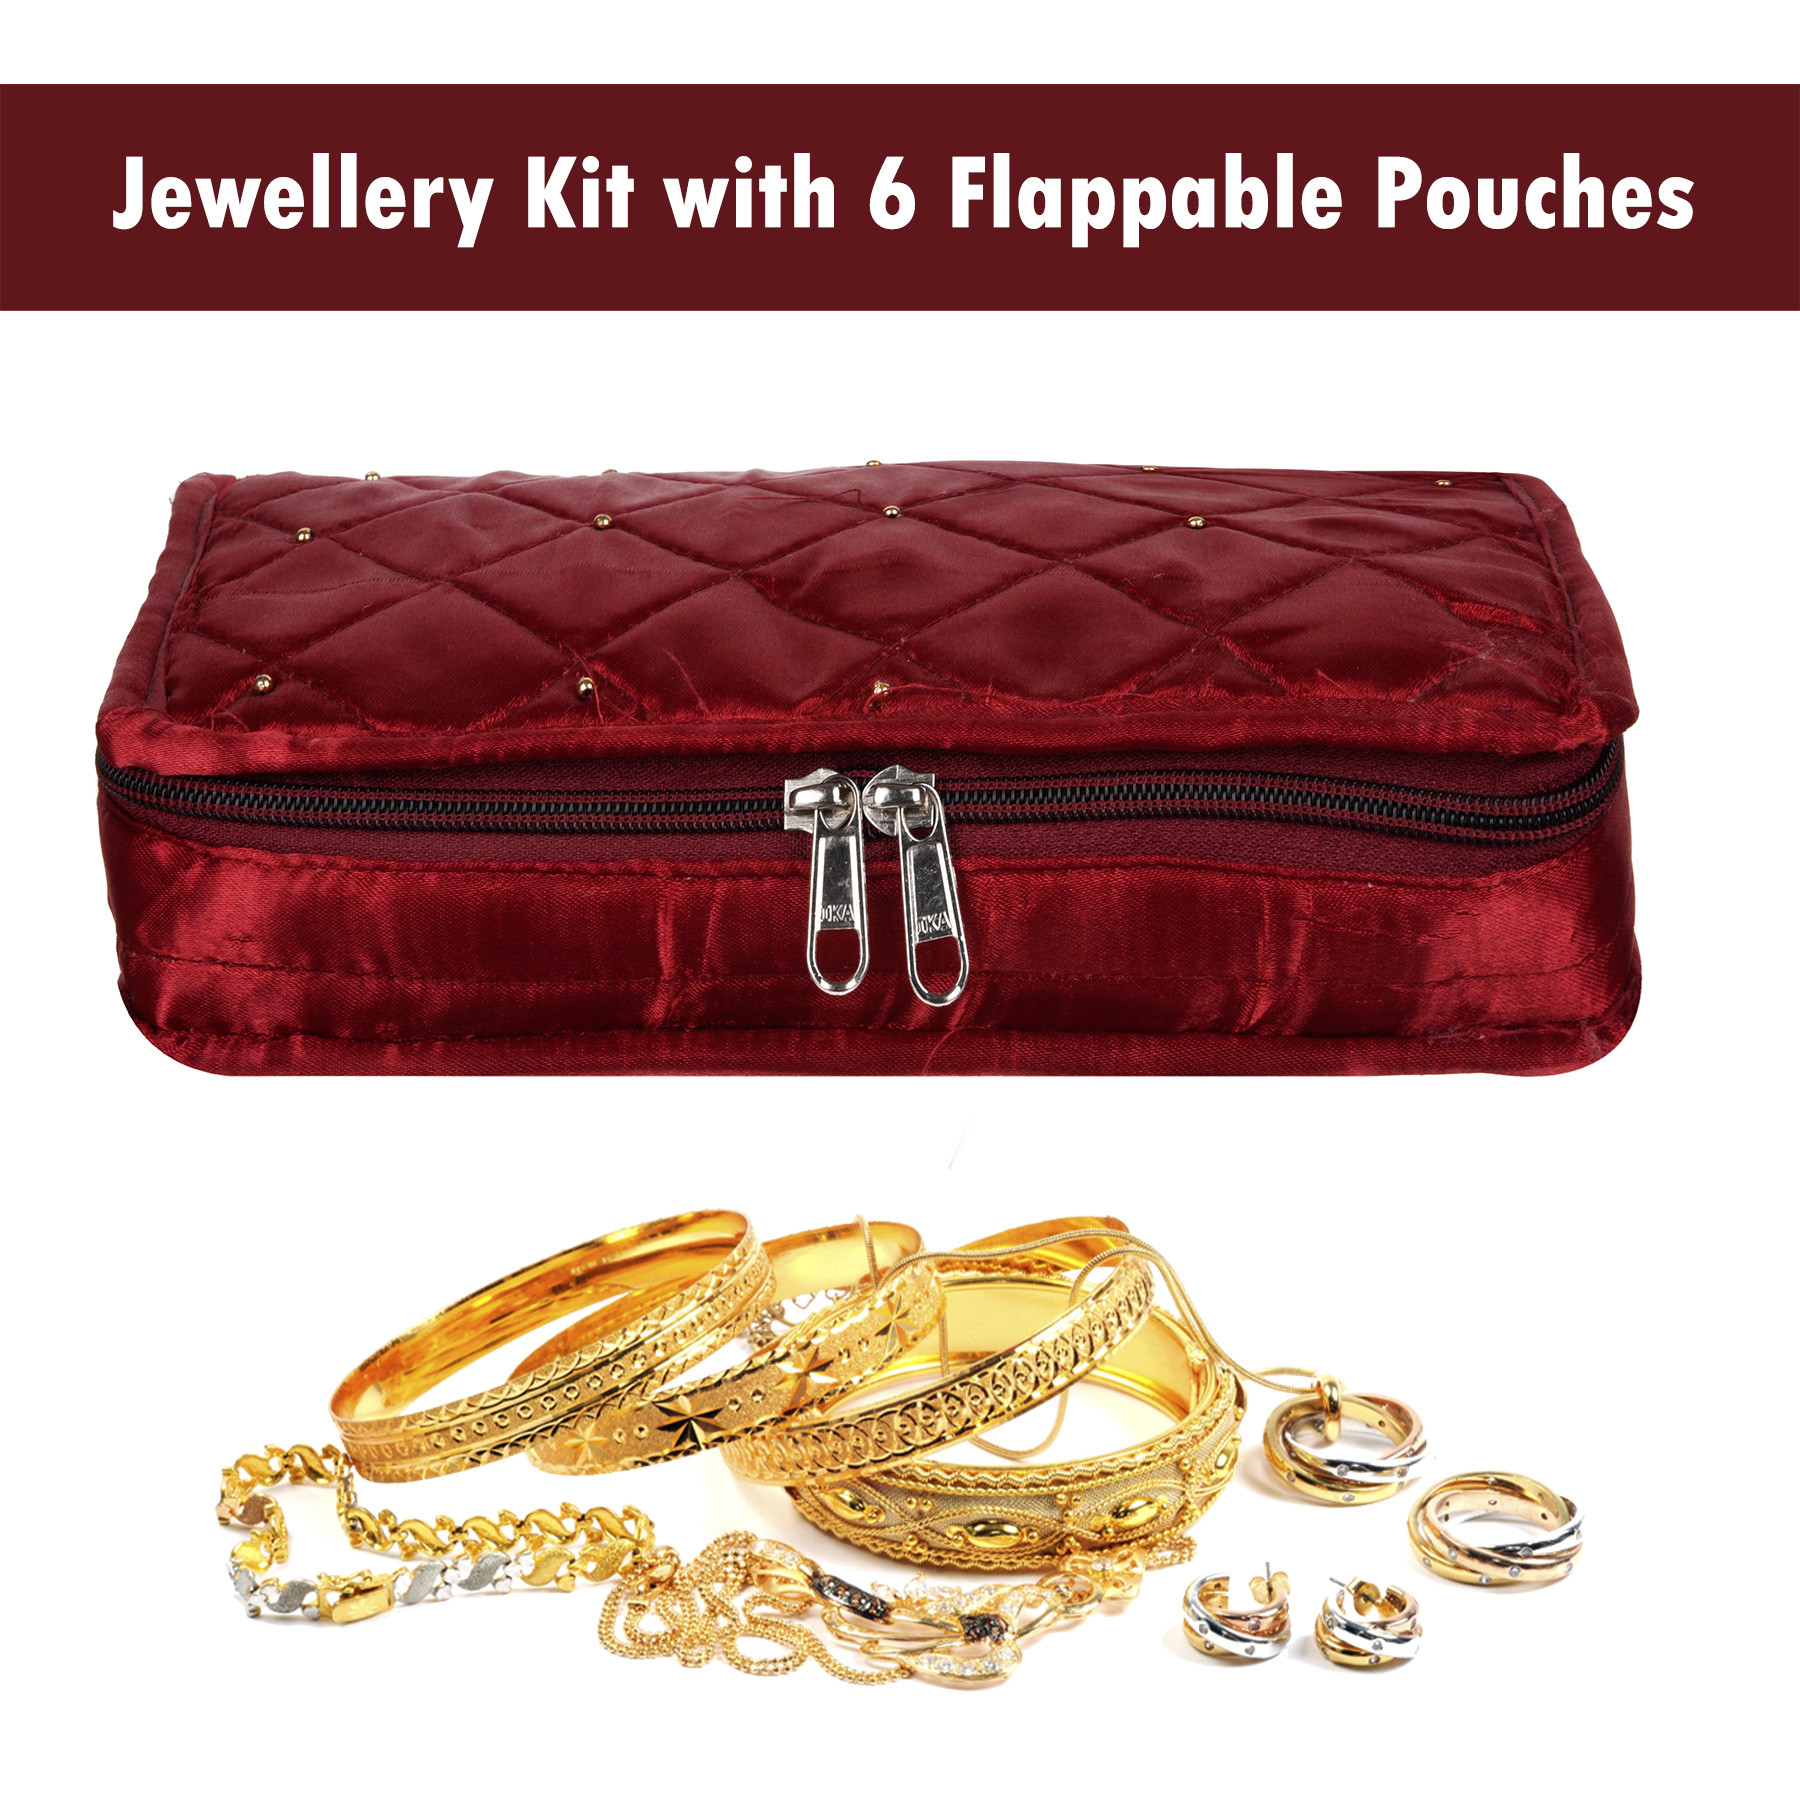 Kuber Industries Jewellery Kit | Satin Jewellery Storage Kit | Moti Beads Jewellery Kit | Cosmetic Kit with 6 Flappable Pouches | Travel Kit for Necklace | Rings | Bracelet | Maroon